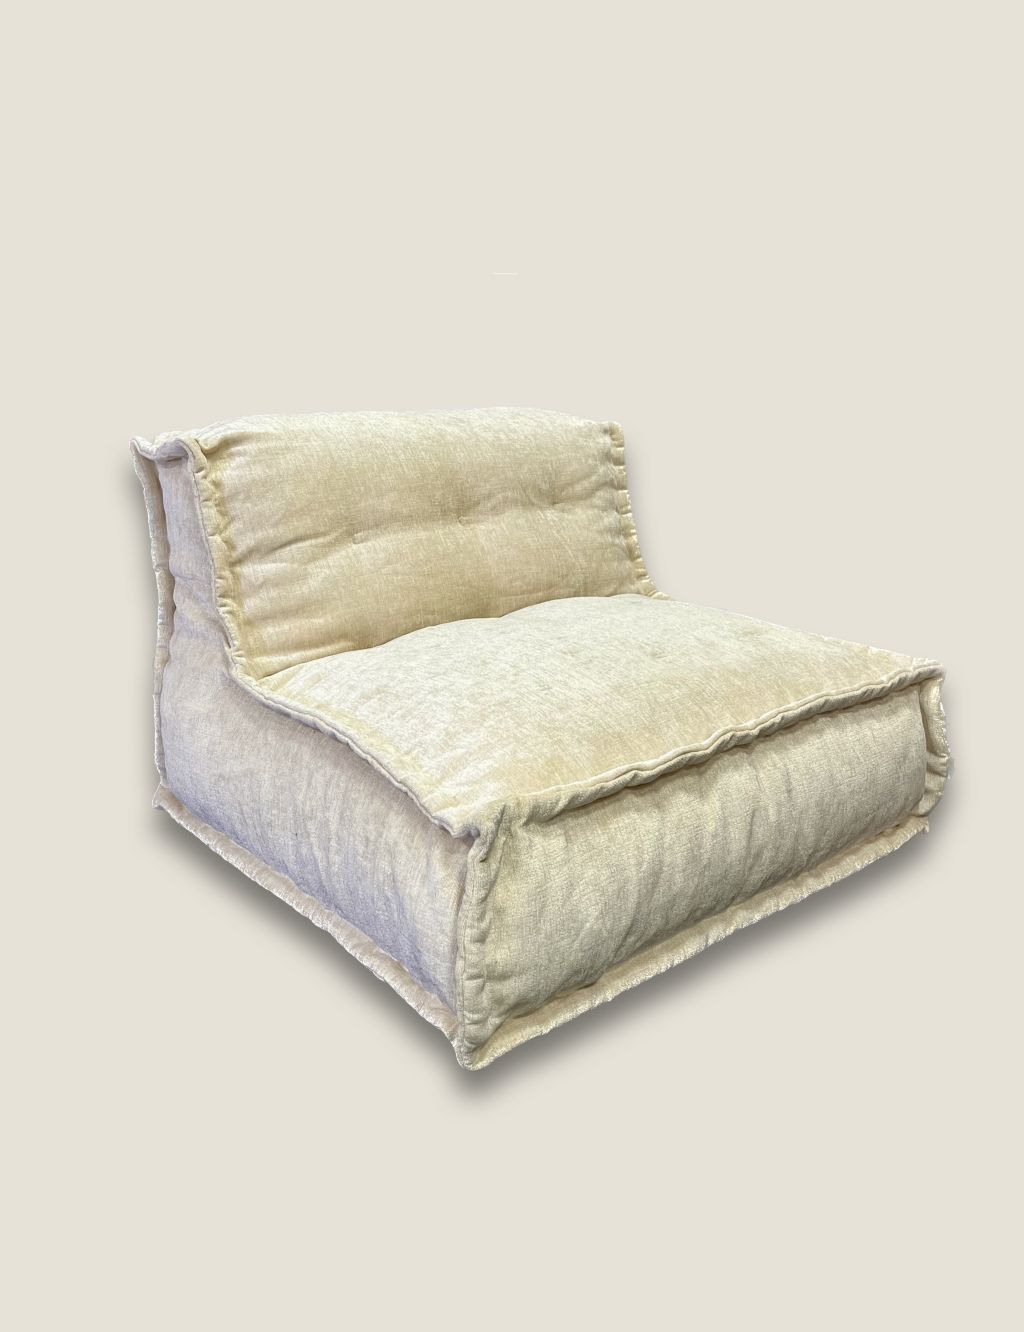 Cream Quilted Beanbag Chair image 1